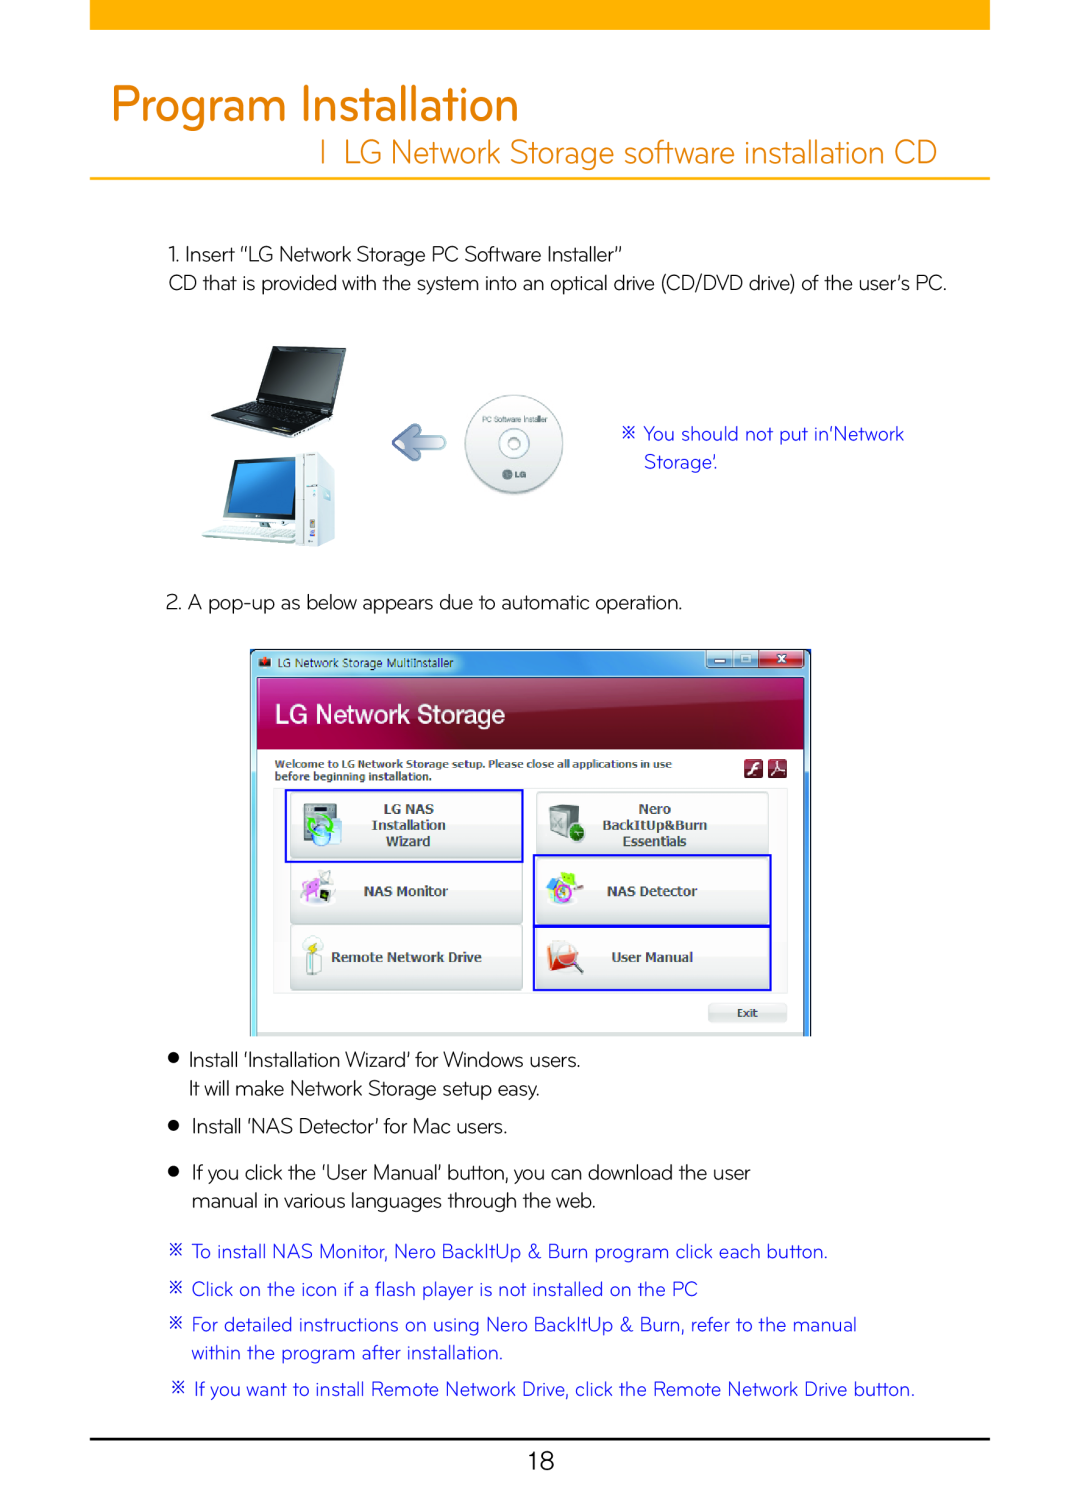 LG Electronics N2R5 Insert “LG Network Storage PC Software Installer”, Install ‘Installation Wizard’ for Windows users 